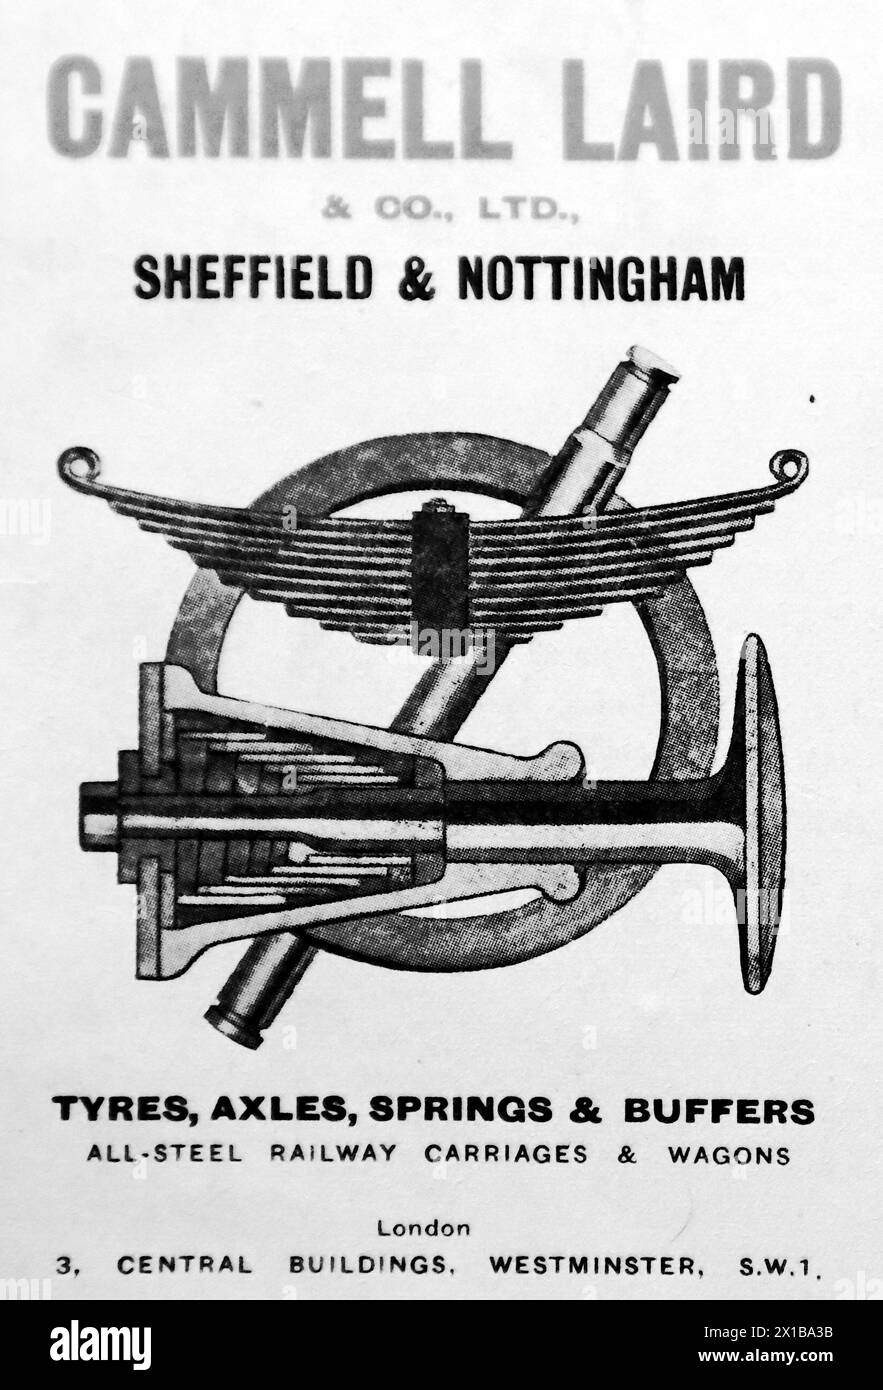 Advertisement for Cammell Laird and Co. Ltd, of Sheffield, Nottingham and Westminster, London. Diagram or logo for railway tyres, axles, springs and buffers. From an original publication dated 15 May 1924, this helps to give an insight into public transport, and the railways in particular, of the 1920s. Stock Photo